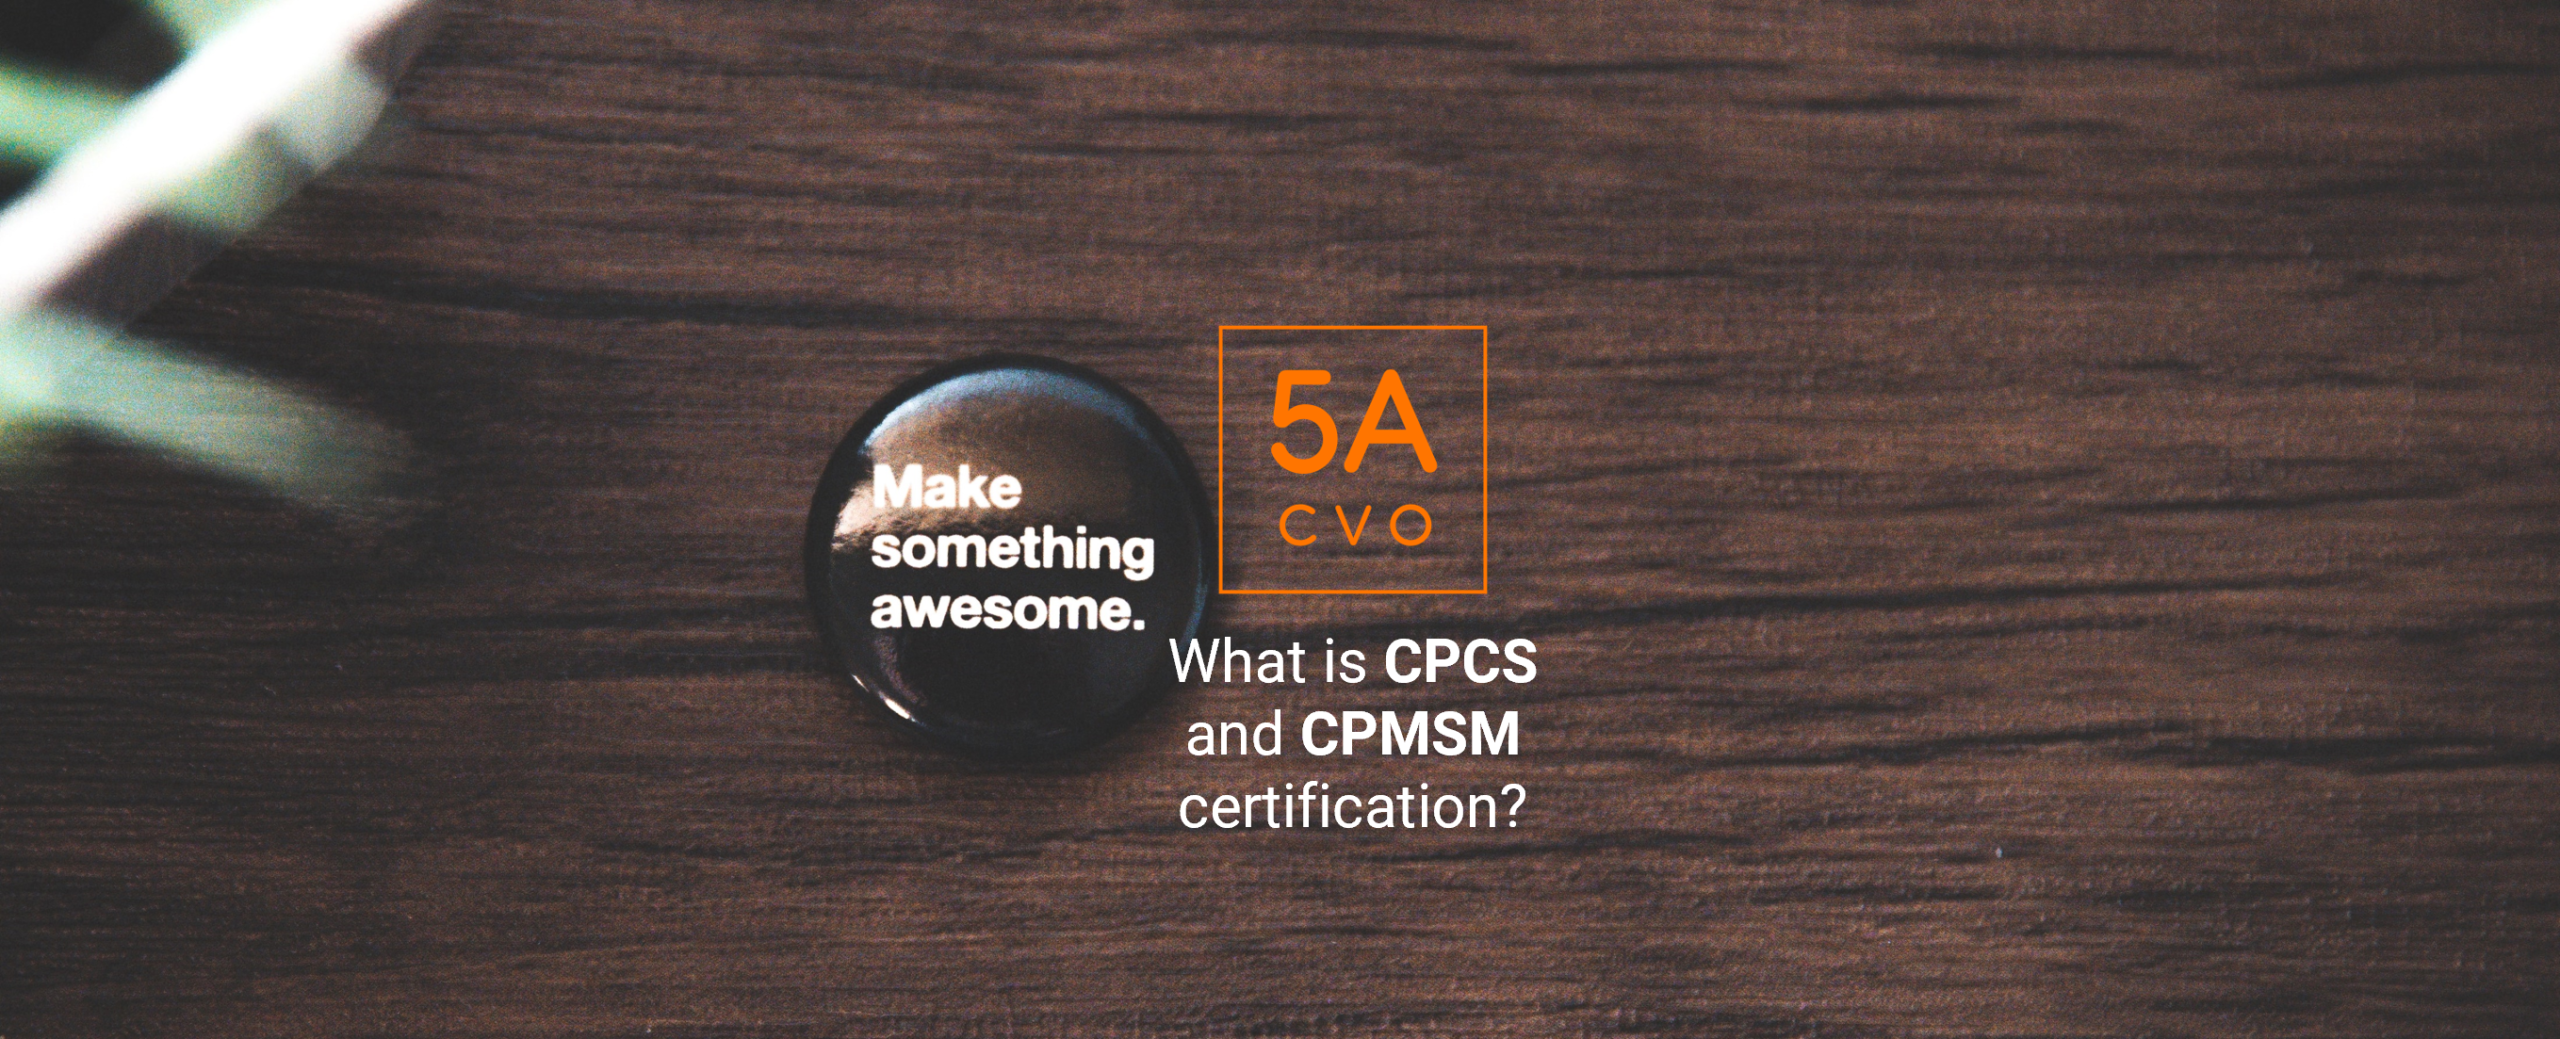 What is CPCS and CPMSM certification?